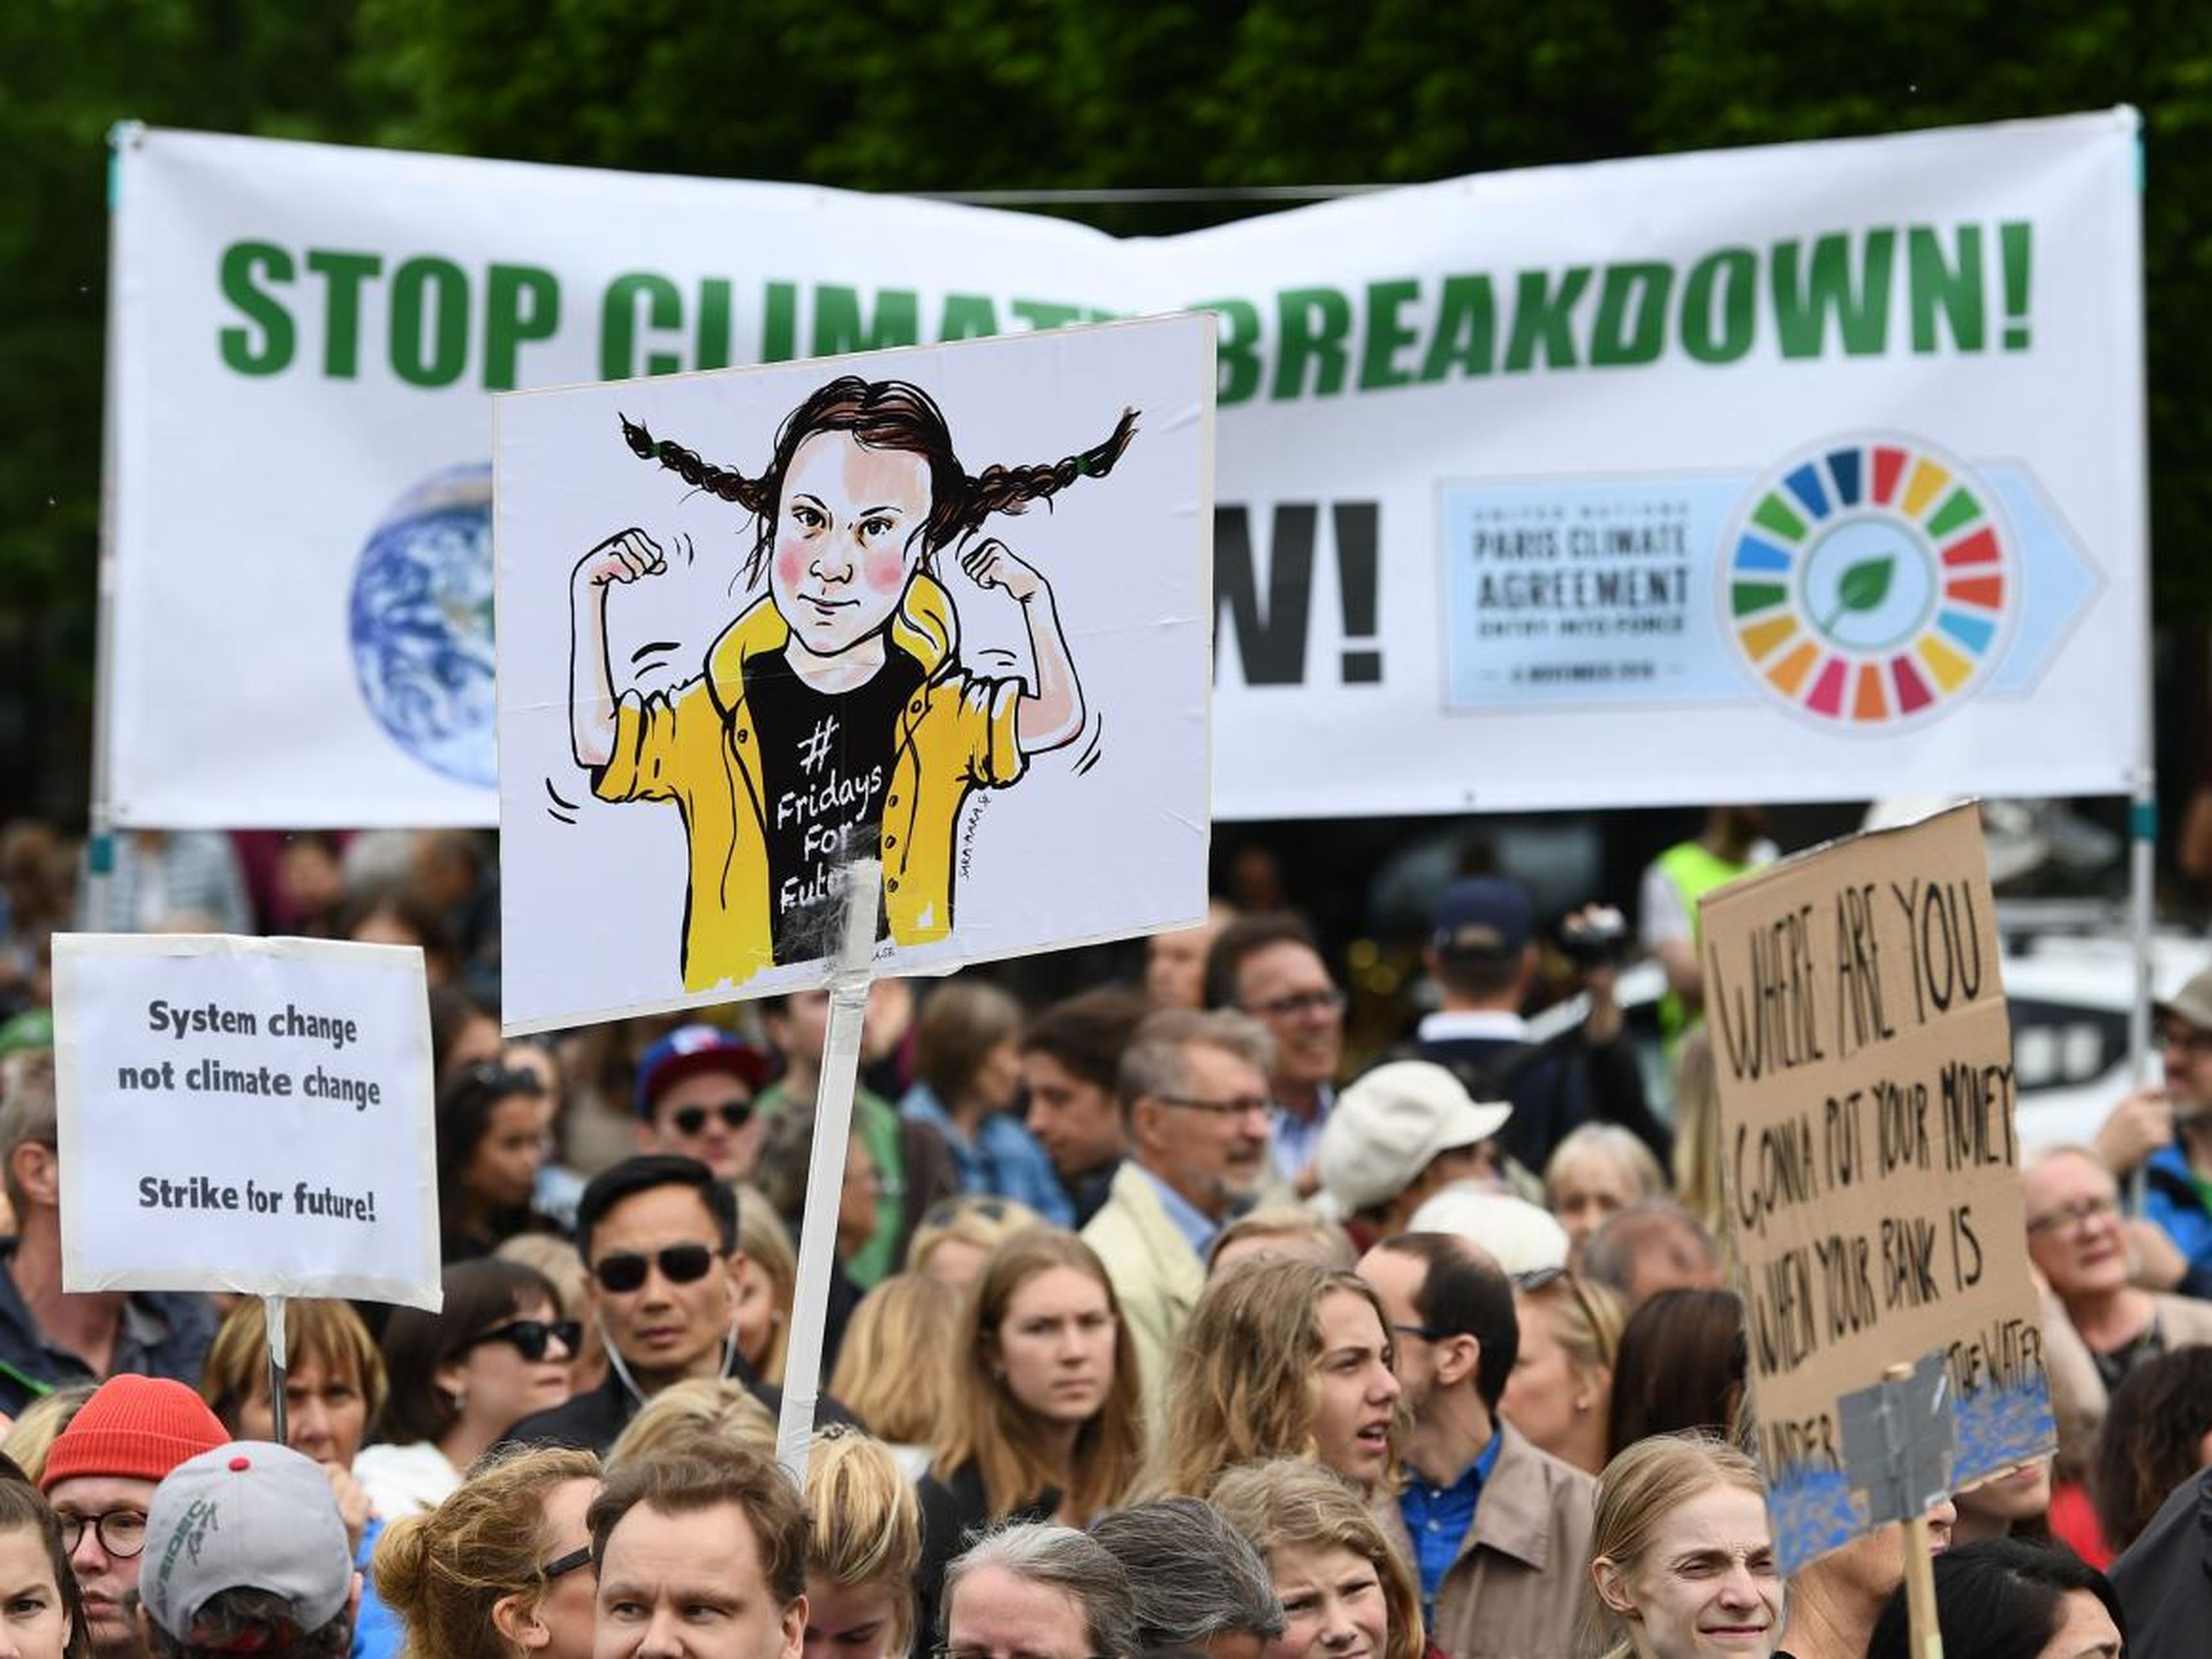 Protesters gather in Stockholm, Sweden, for the "Global Strike For Future" demonstration on May 24, 2019.